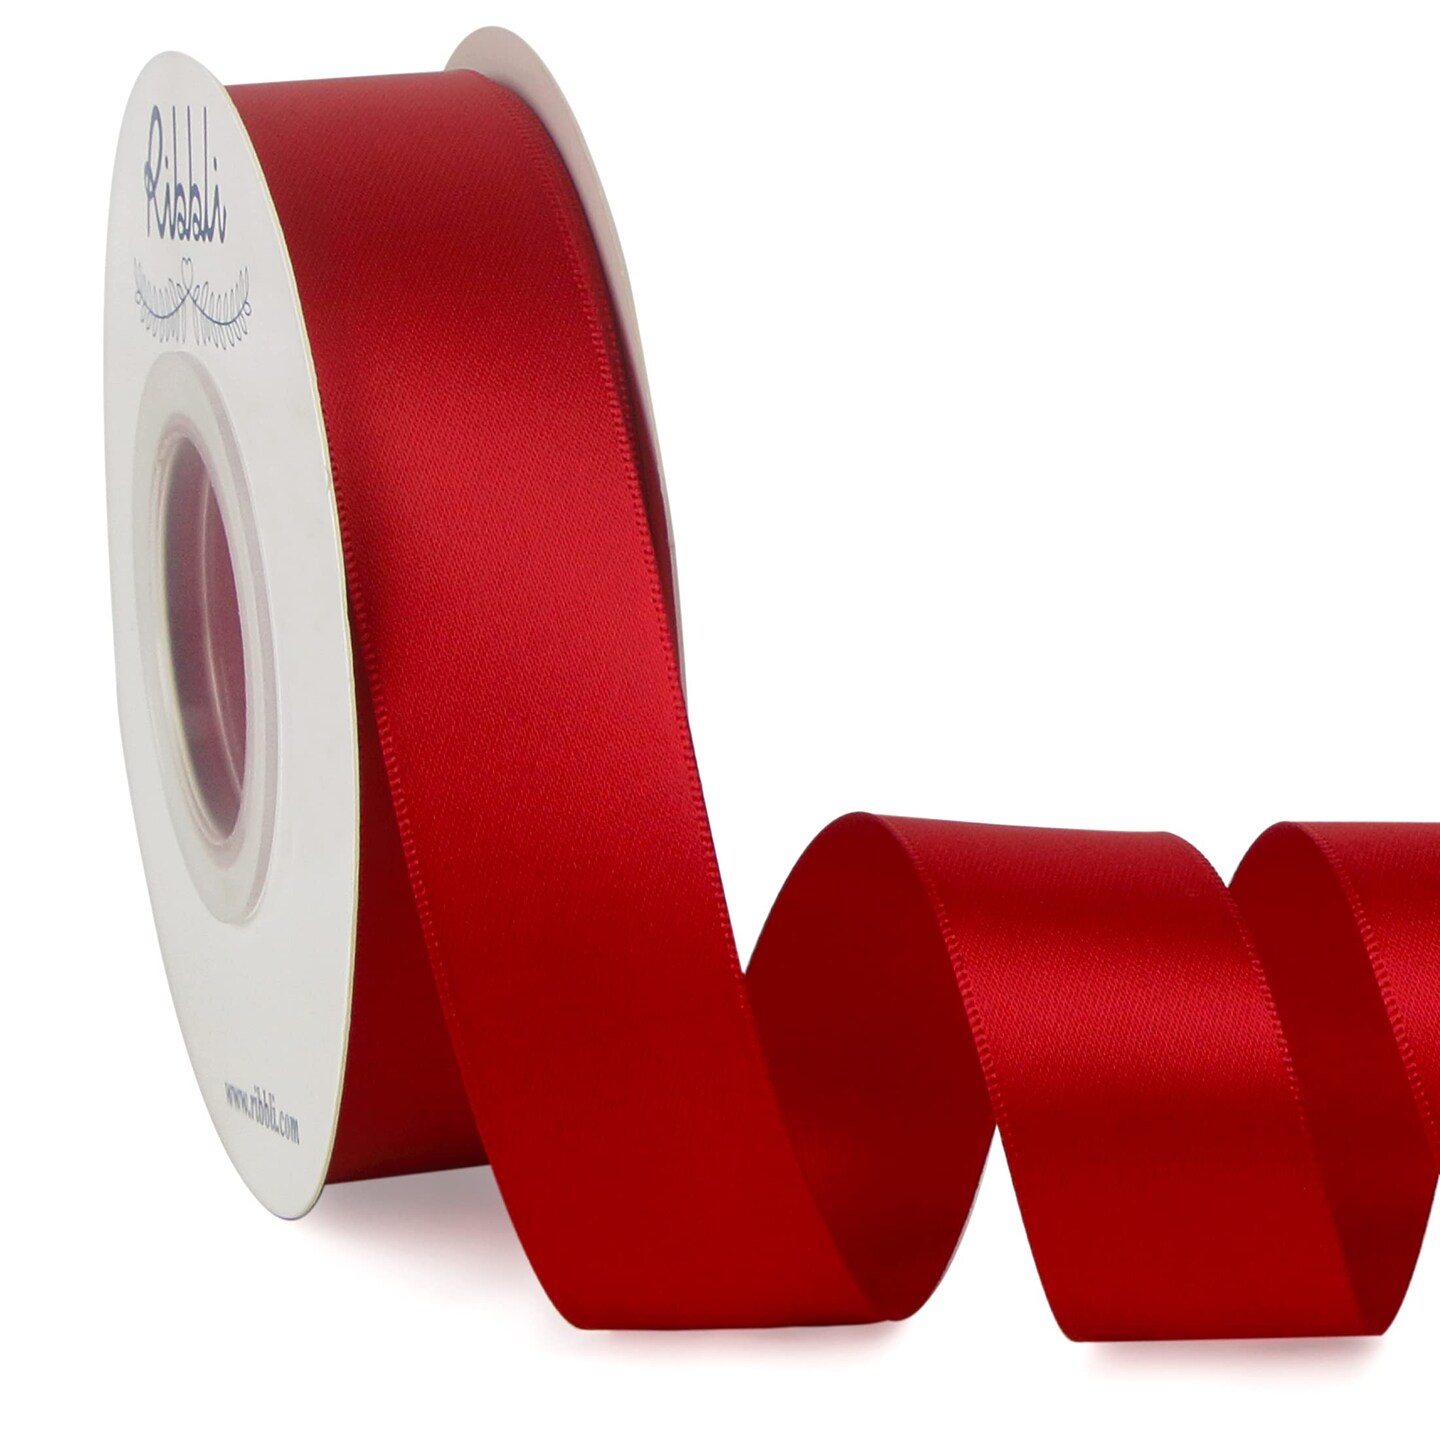 Ribbli Double Faced Red Satin Ribbon,1” x Continuous 25 Yards,Fabric Ribbon  Use for Bows Bouquet,Christmas Gift Wrapping,Floral Arrangement